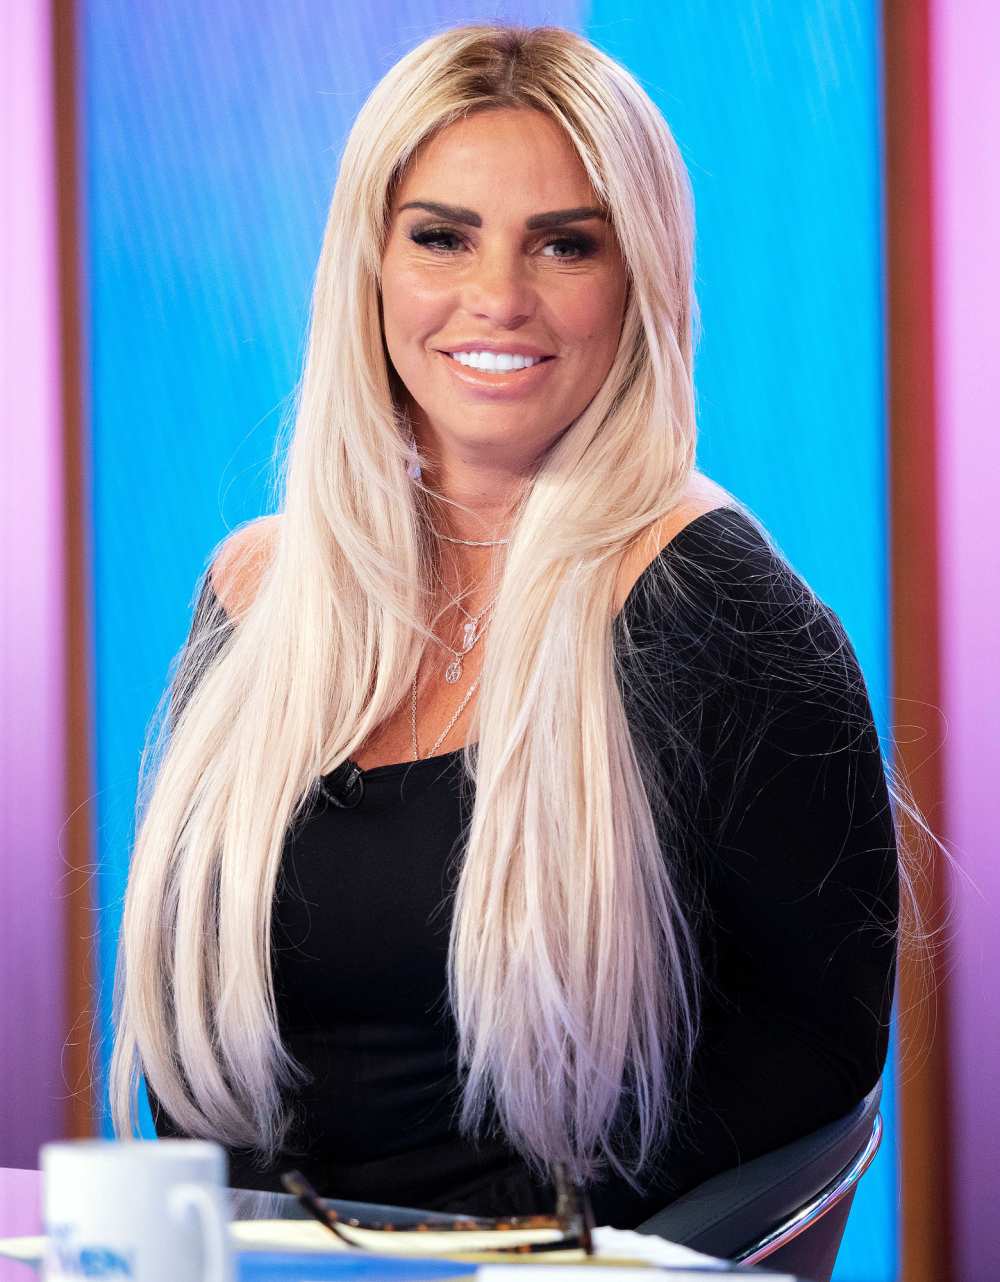 Katie Price Is Open Having 6th Child If Her Body Allows